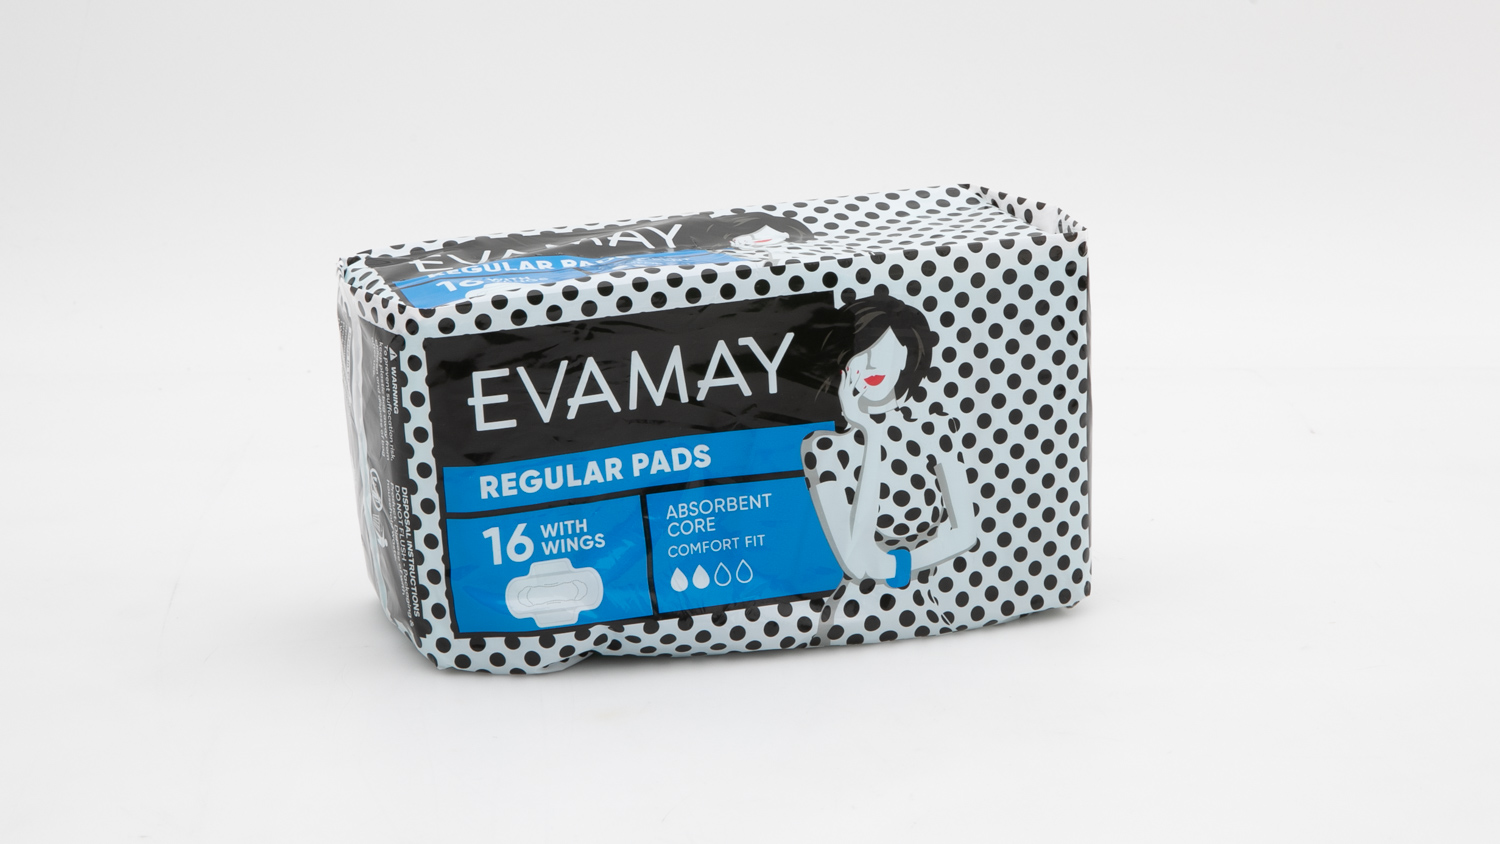 Woolworths Evamay Regular Pads with wings carousel image